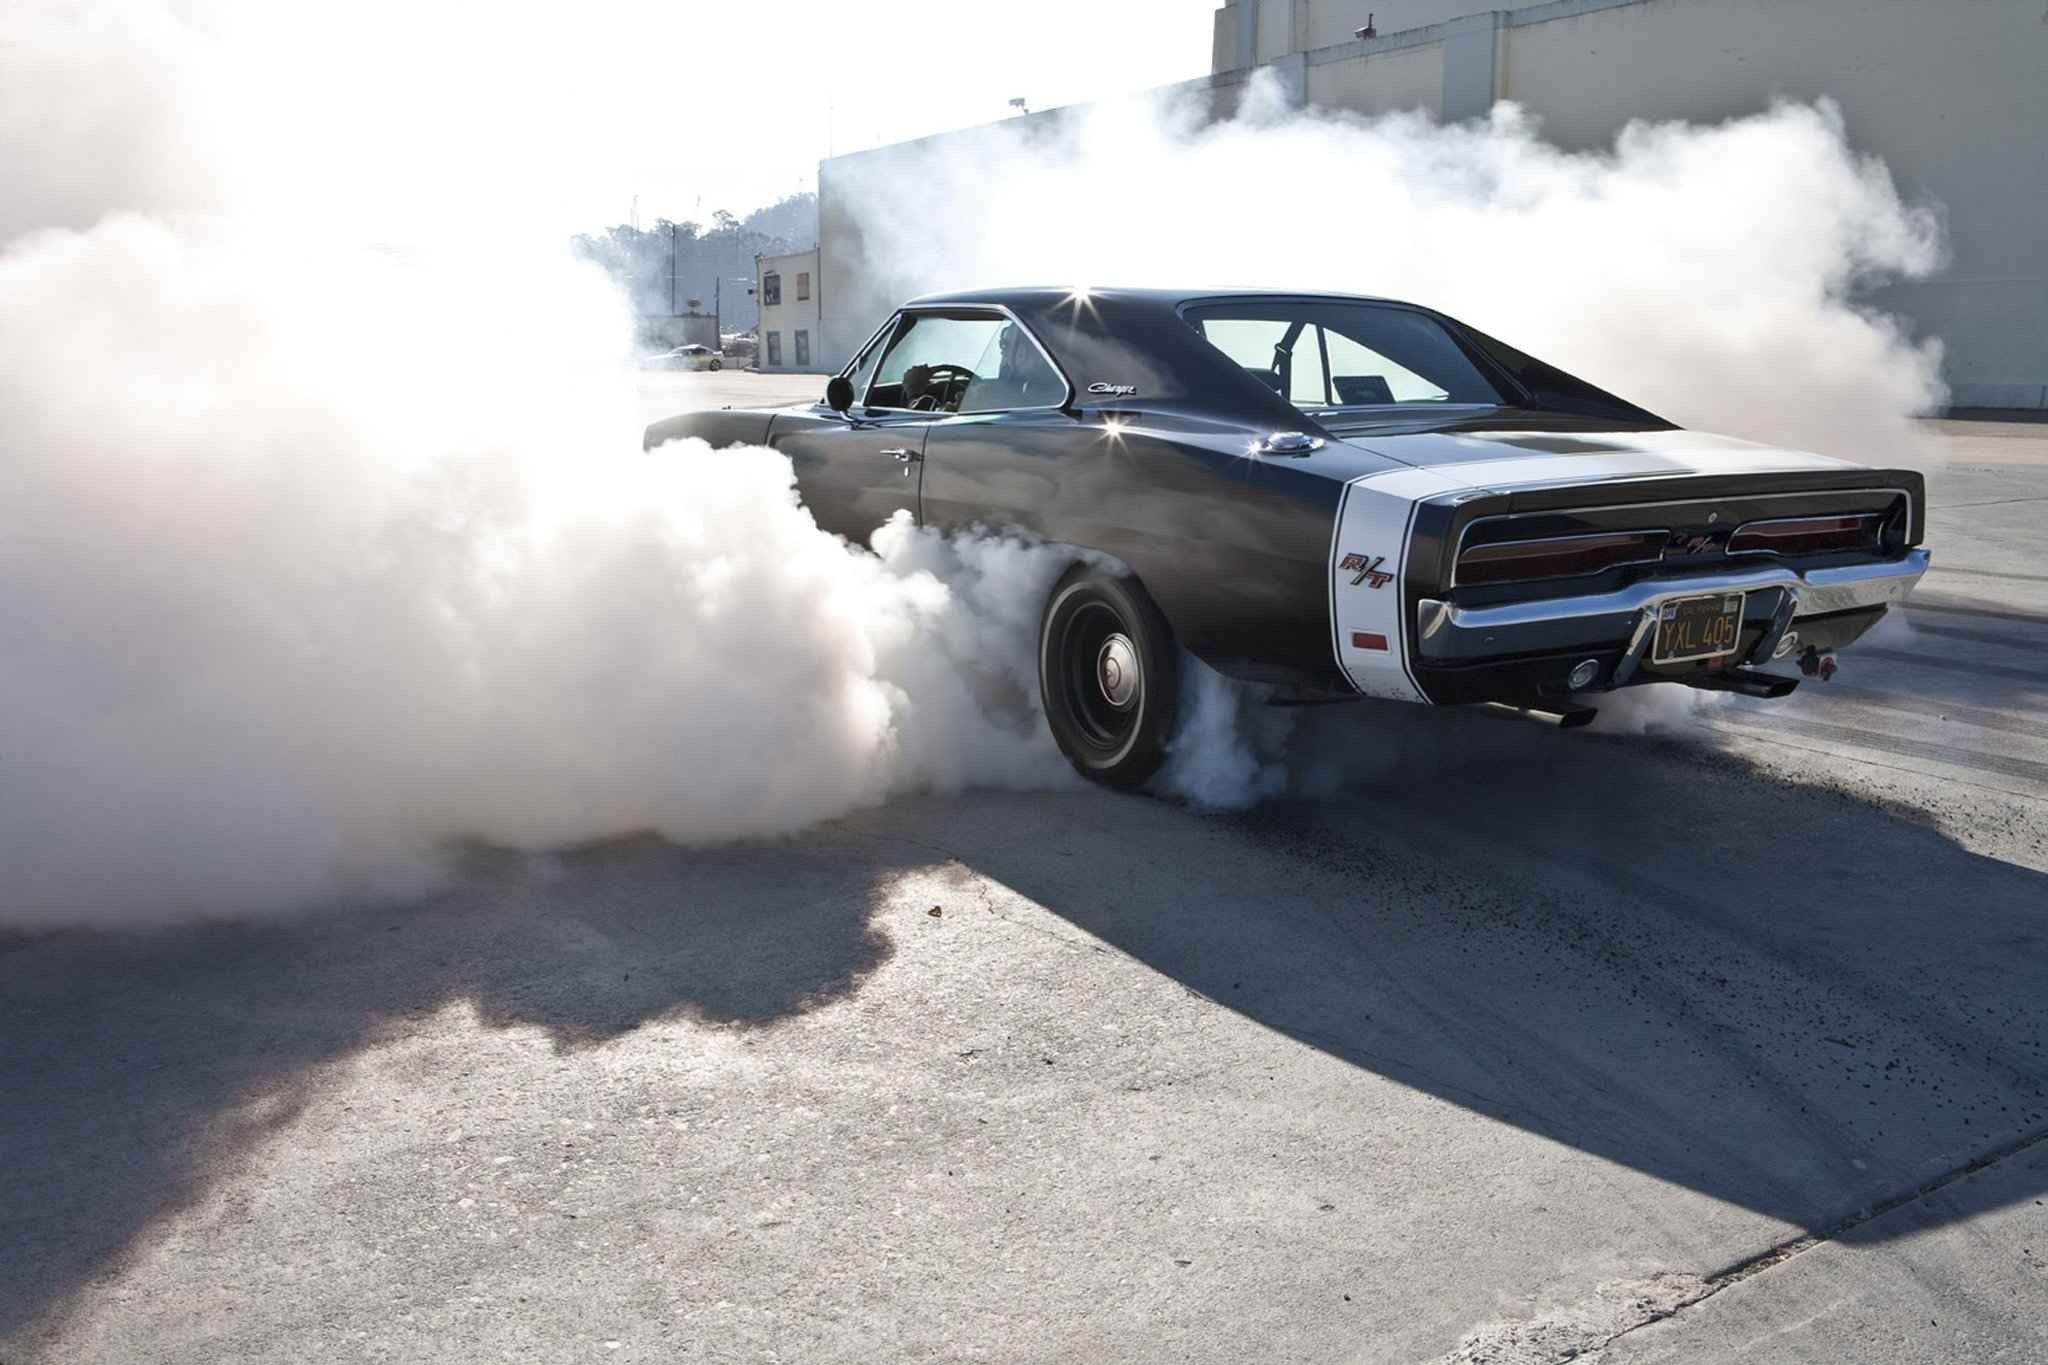 General 2048x1365 Dodge Charger car Dodge smoke vehicle black cars muscle cars American cars burnout